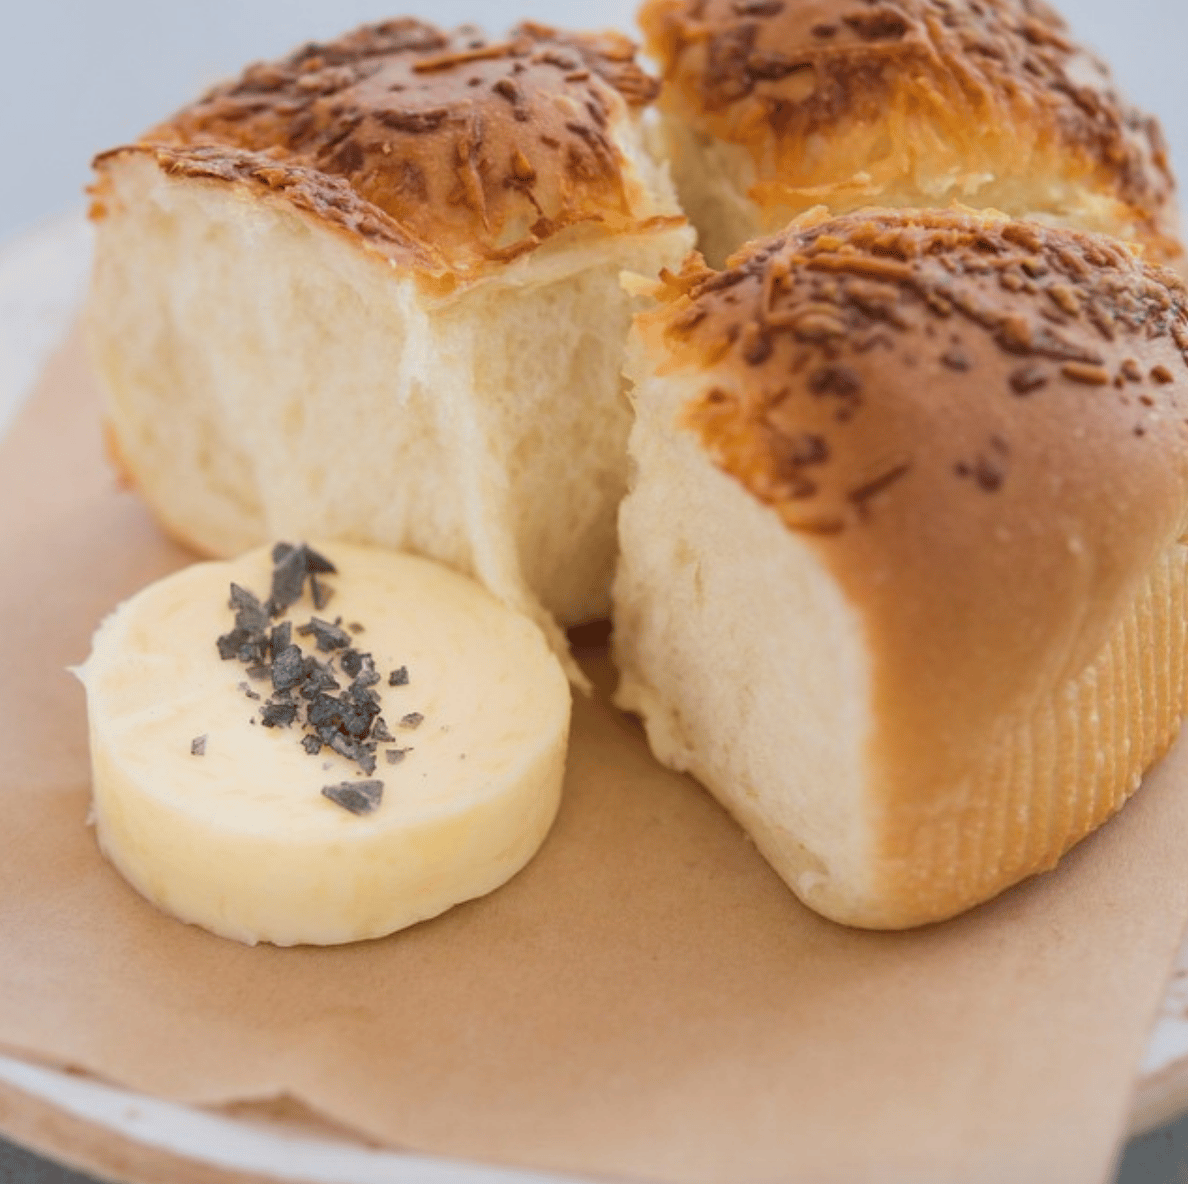 PARKER HOUSE ROLL